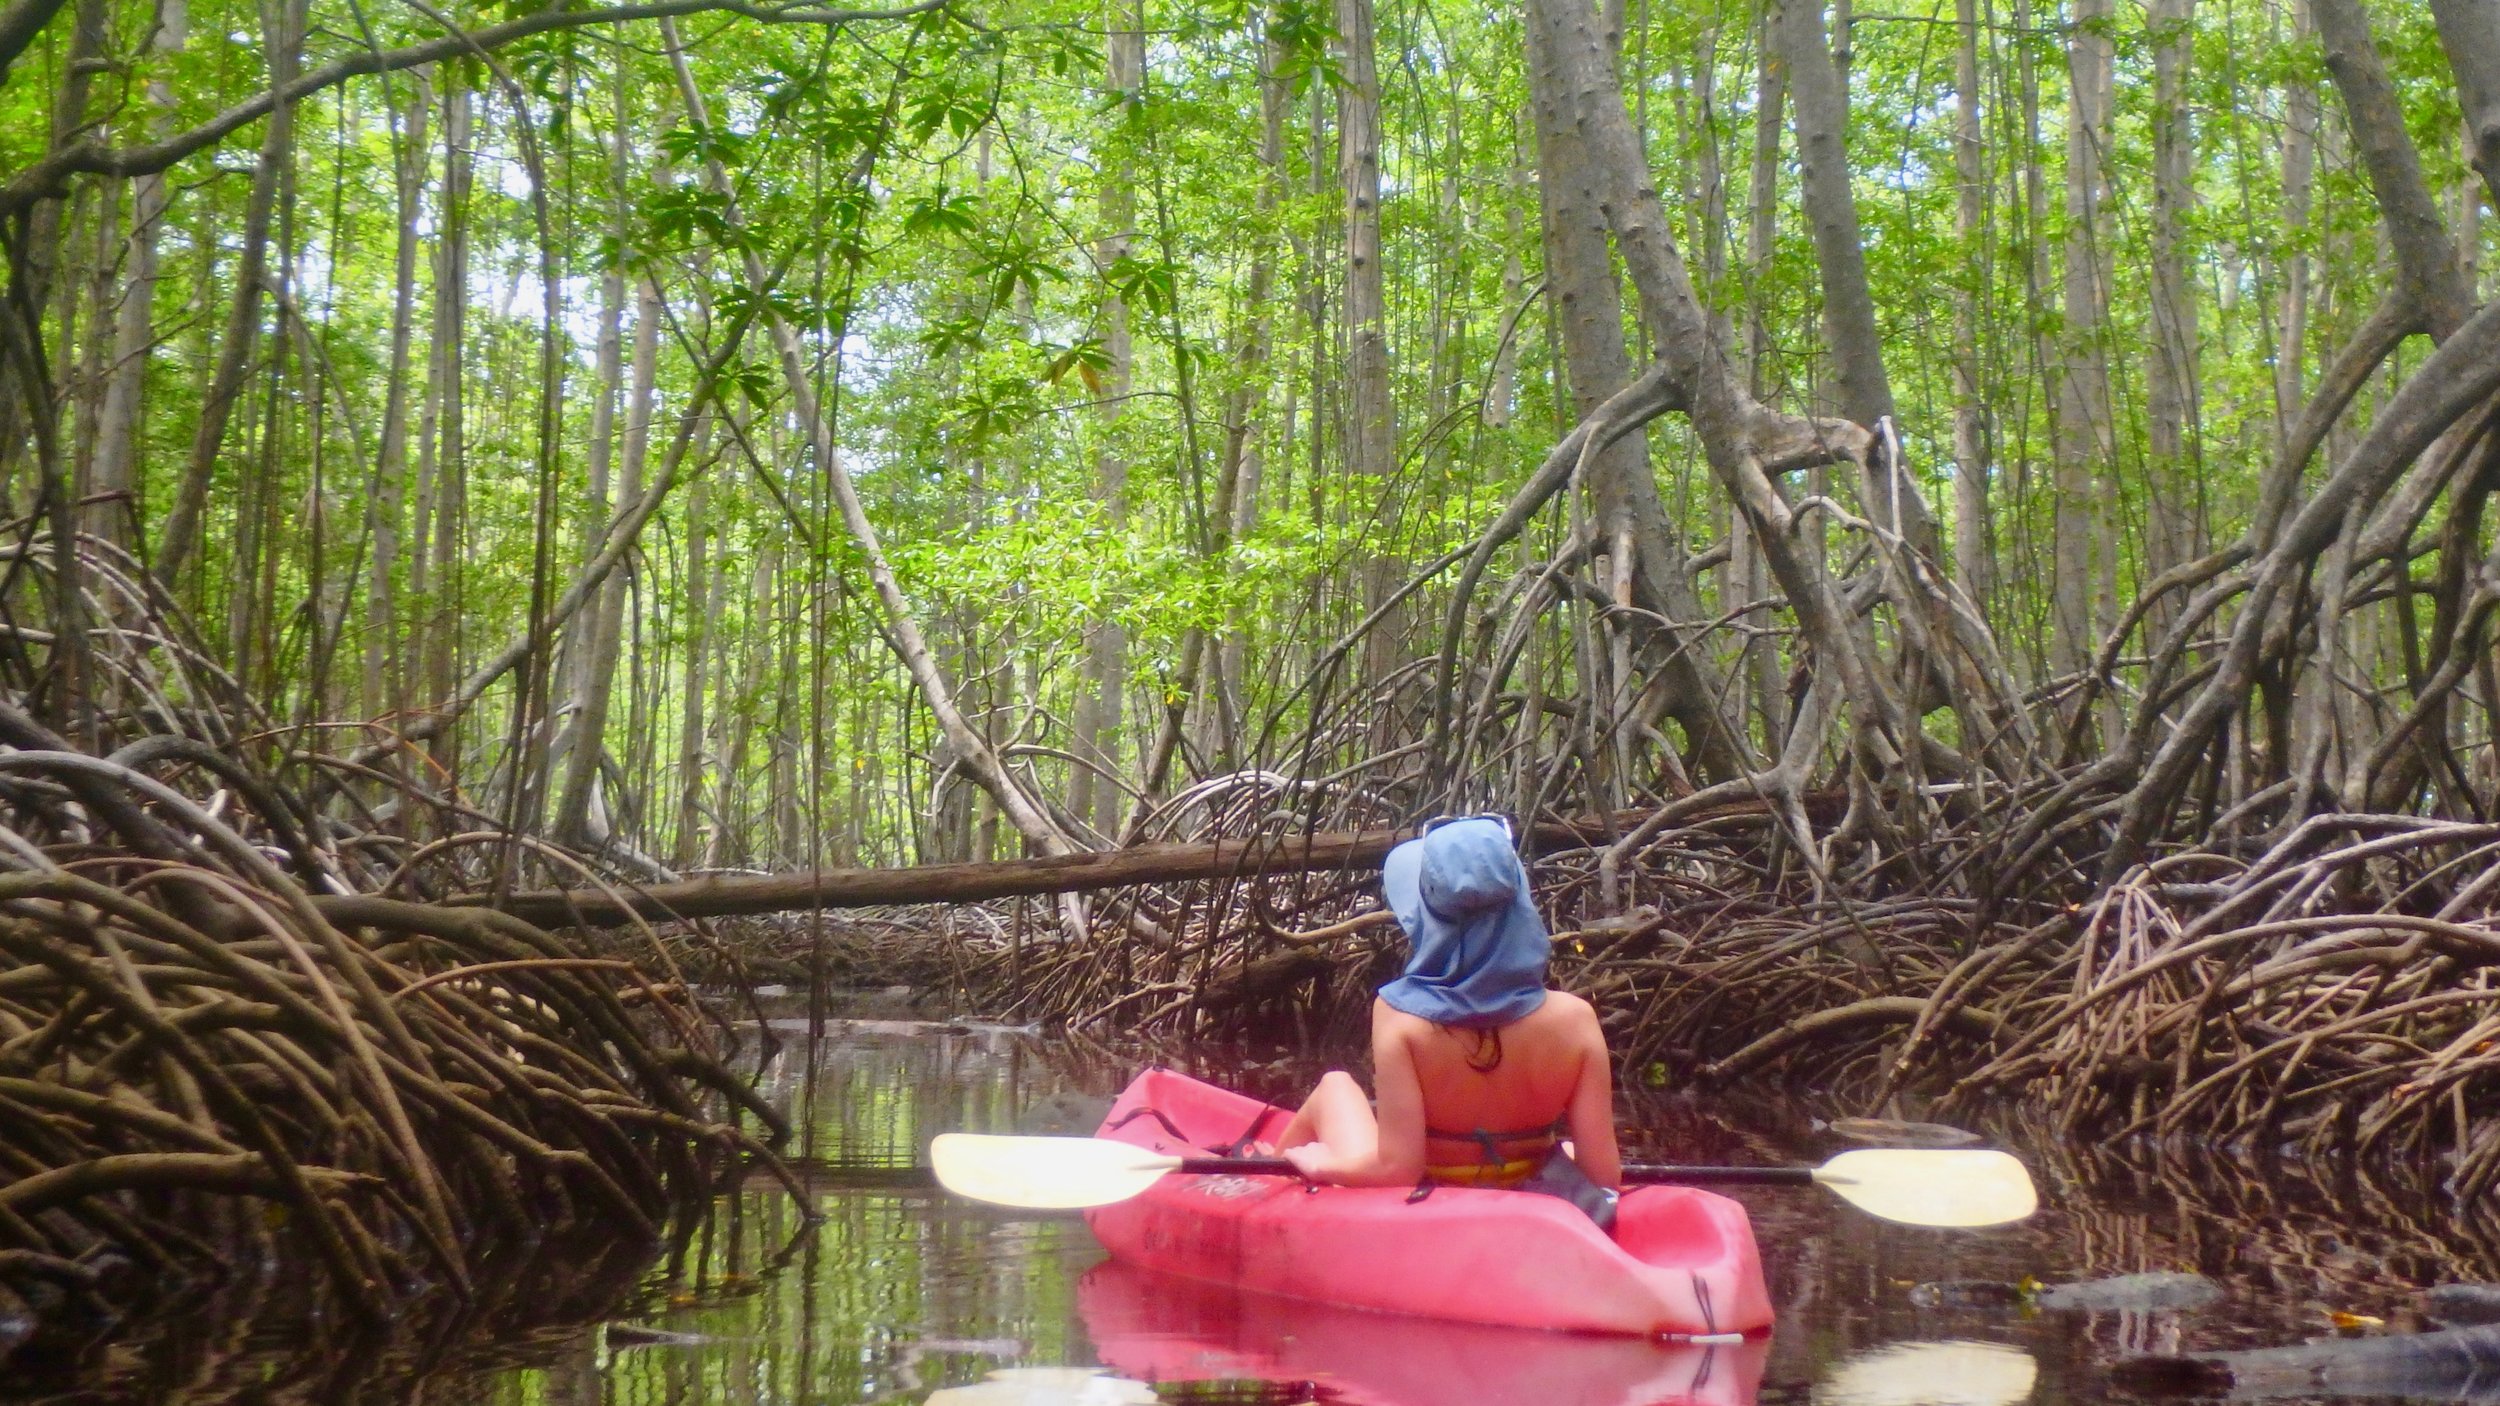 Gorgeous Scenery in Mangroves Costa Rica